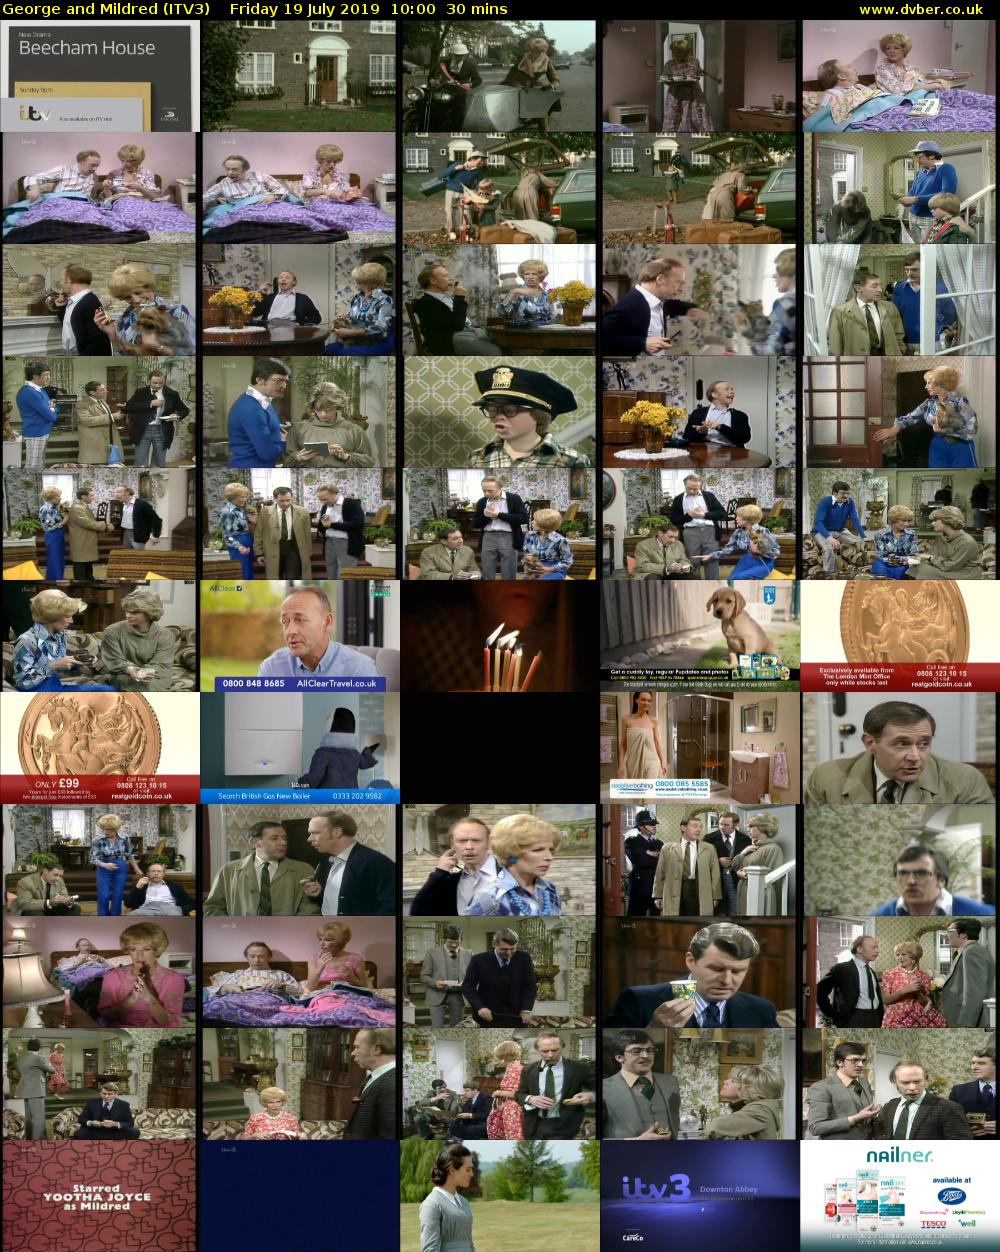 George and Mildred (ITV3) Friday 19 July 2019 10:00 - 10:30